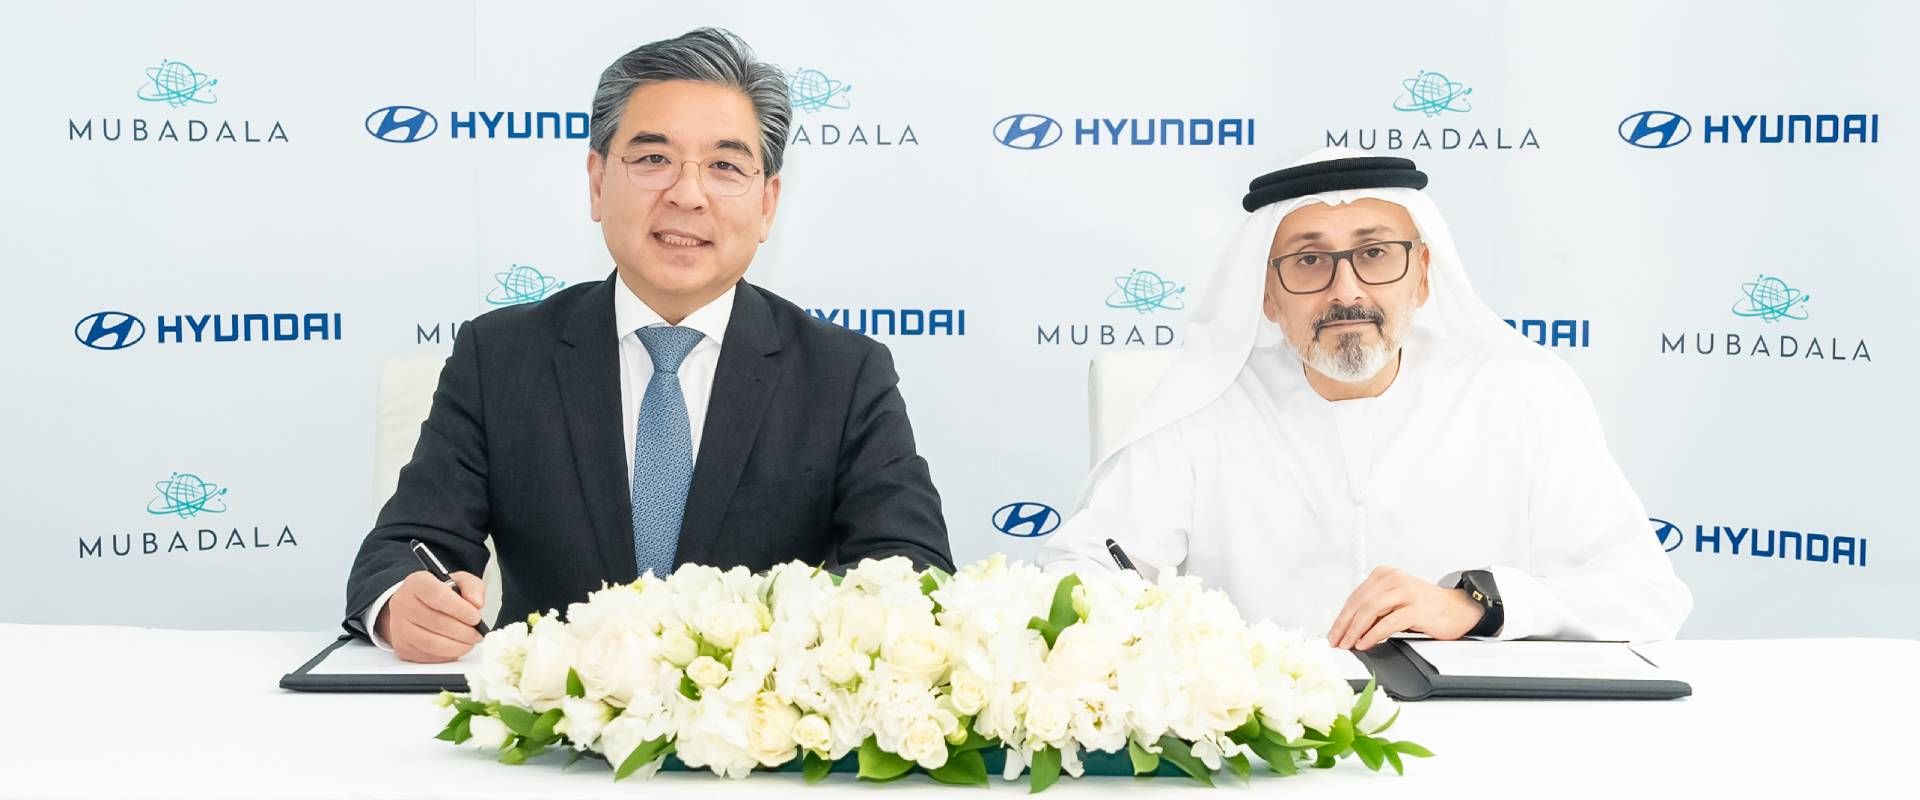 Jaehoon Chang, President and CEO of Hyundai Motor Company, and  (right) Waleed Al Mokarrab Al Muhairi, Deputy Group Chief Executive Officer of Mubadala Investment Company signed an agreement to jointly explore business opportunities for future mobility and technology